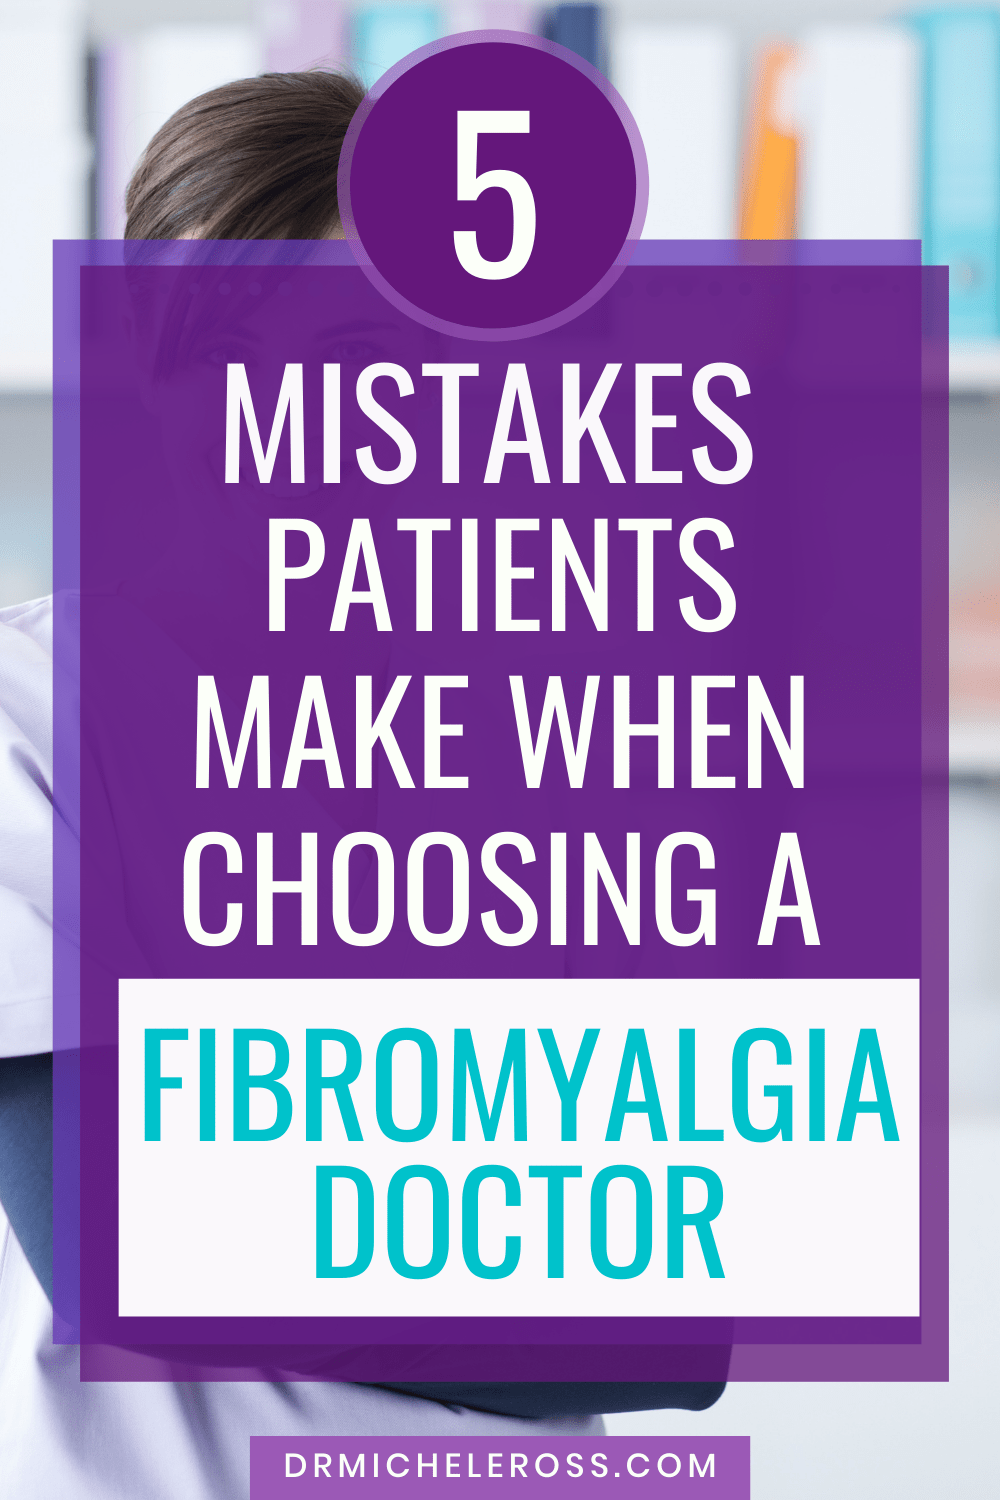 5 Mistakes Patients Make When Choosing a Fibromyalgia Doctor